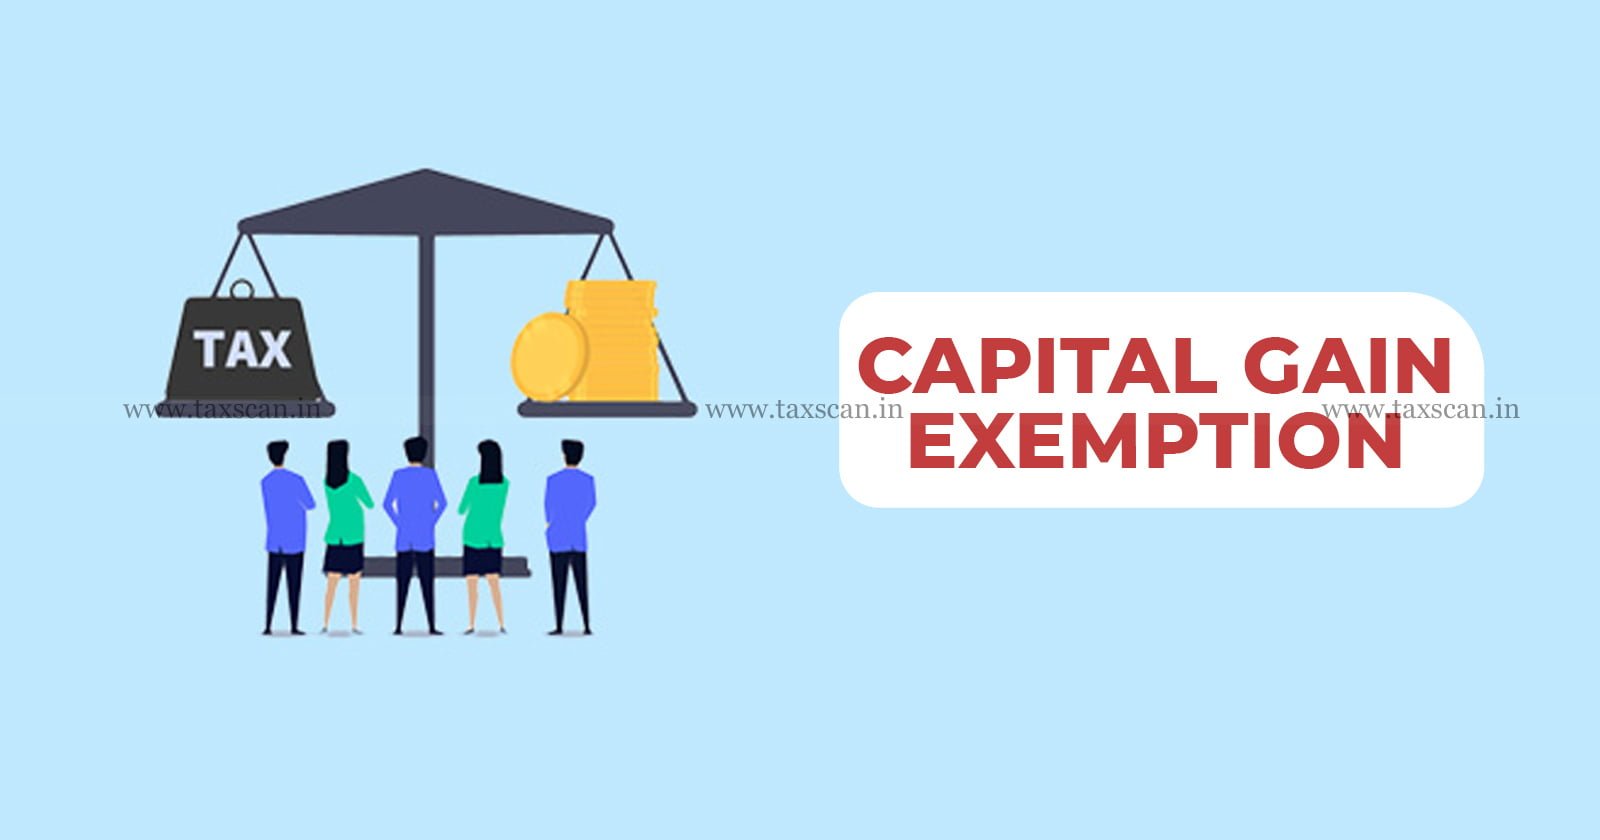 Capital Gain Exemption - us 54 Not Allowable - Two Independent Residential Units - ITAT - Taxscan